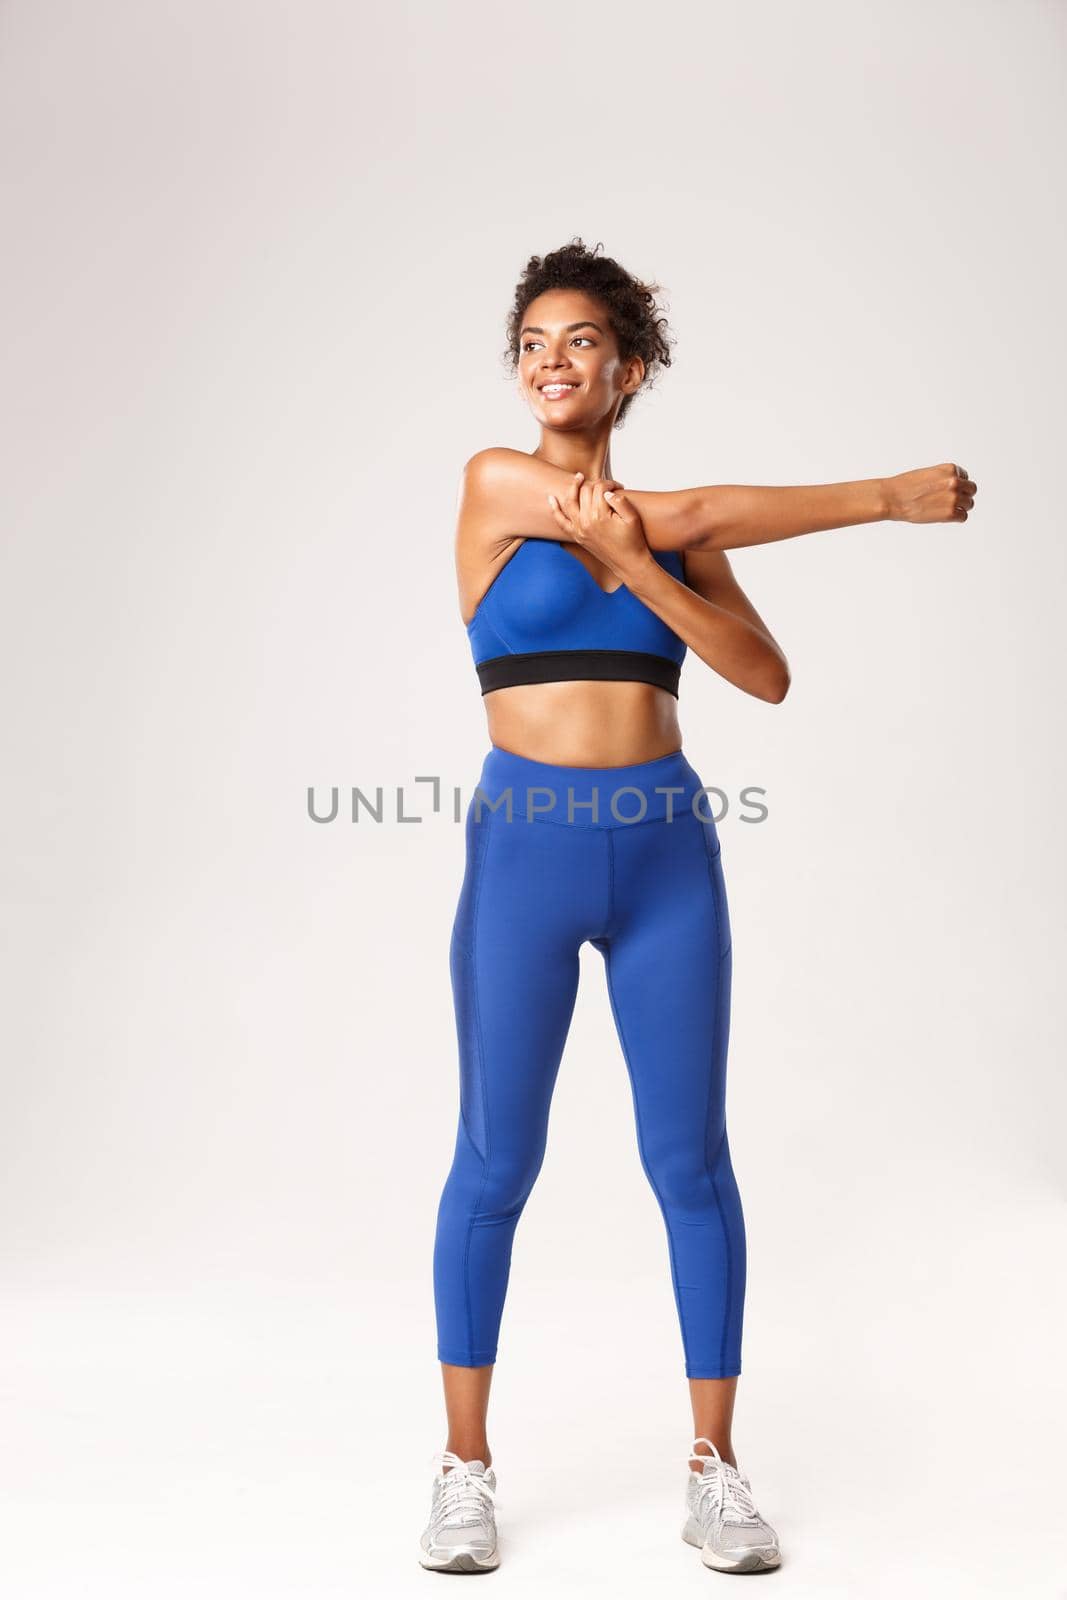 Full length of smiling beautiful african-american sportswoman, stretching hands, warming-up before workout and looking left determined, standing over white background.